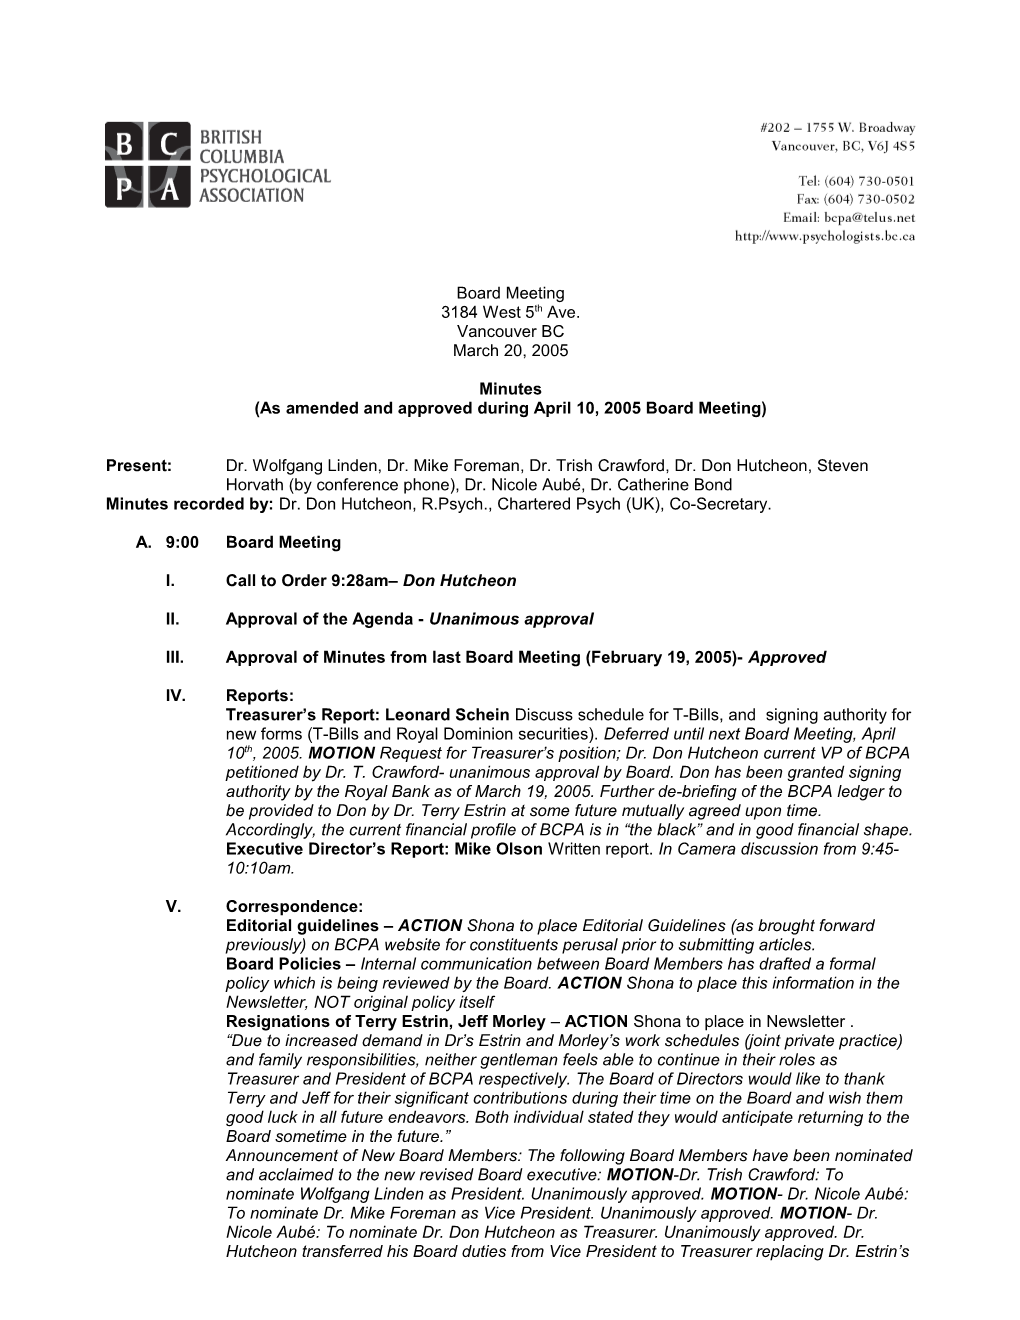 As Amended and Approved During April 10, 2005 Board Meeting